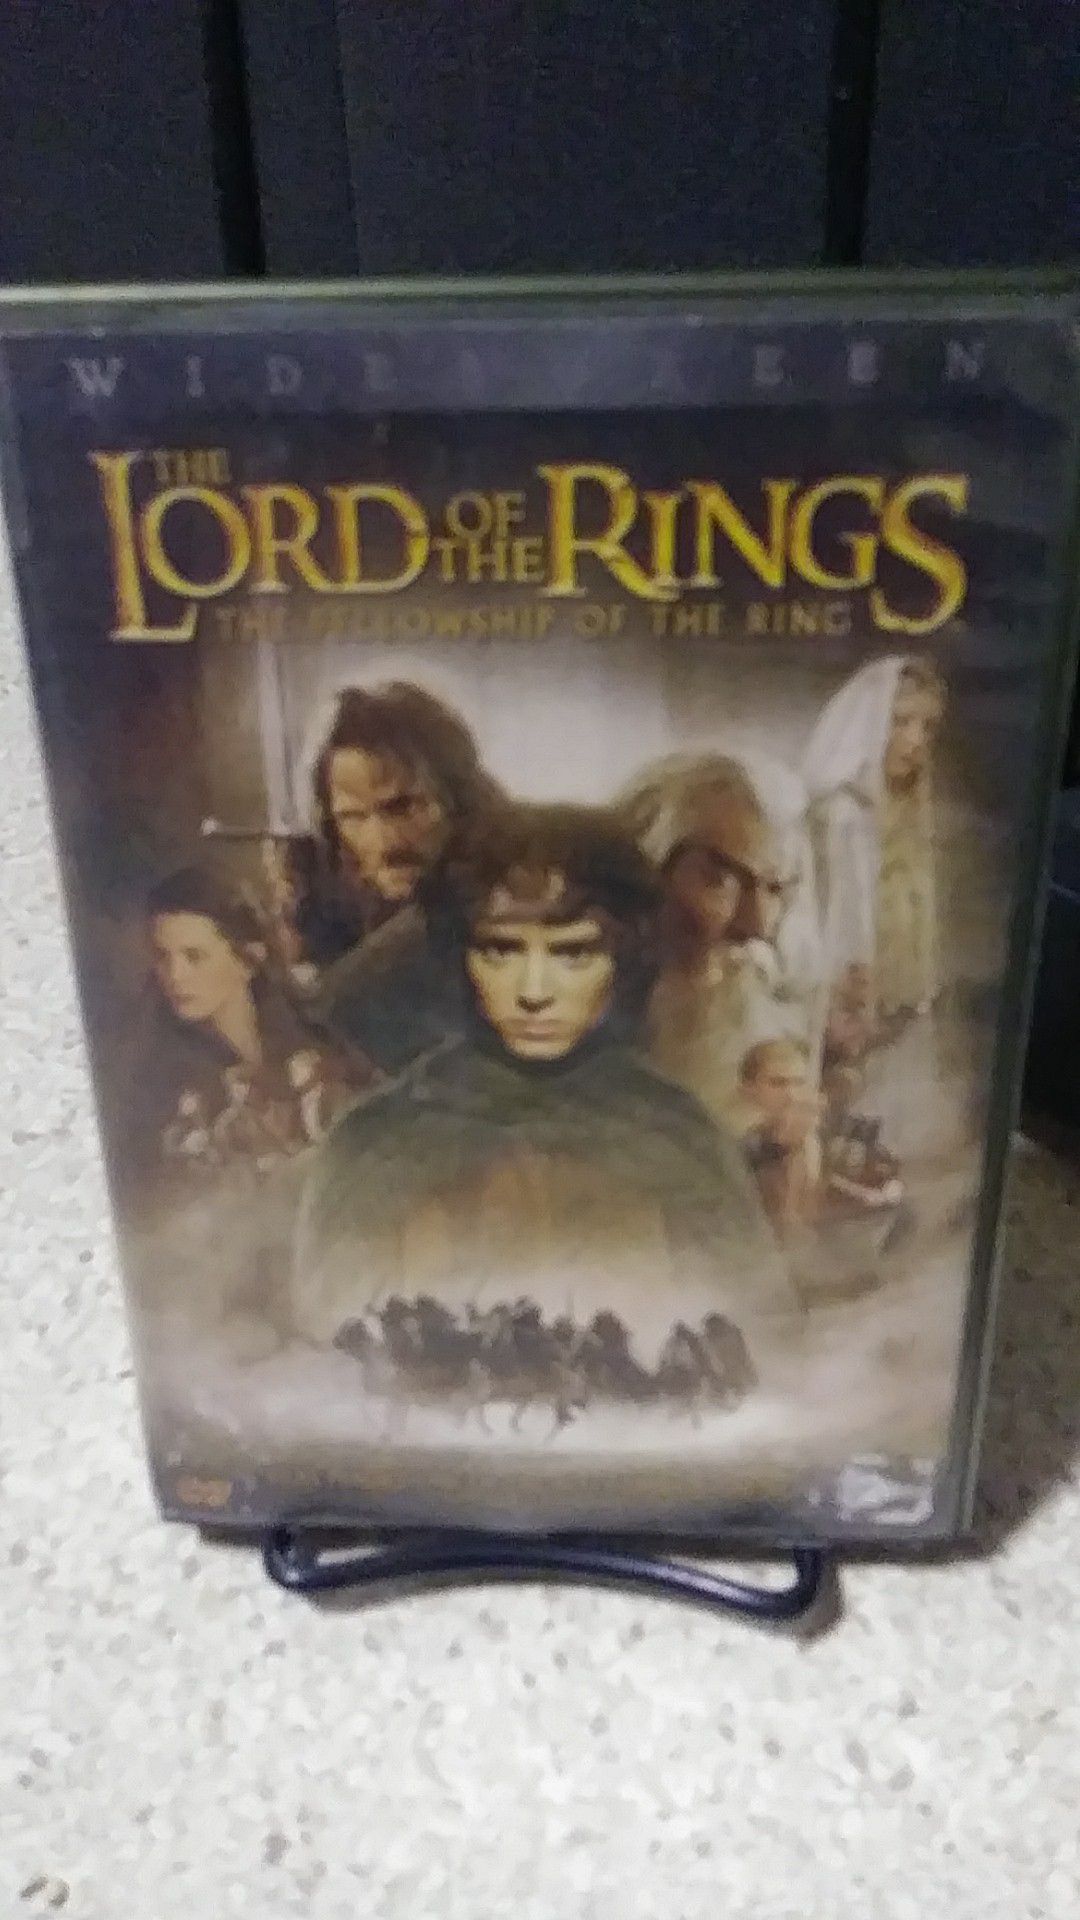 Lord of the rings fellowship of the rings dvd